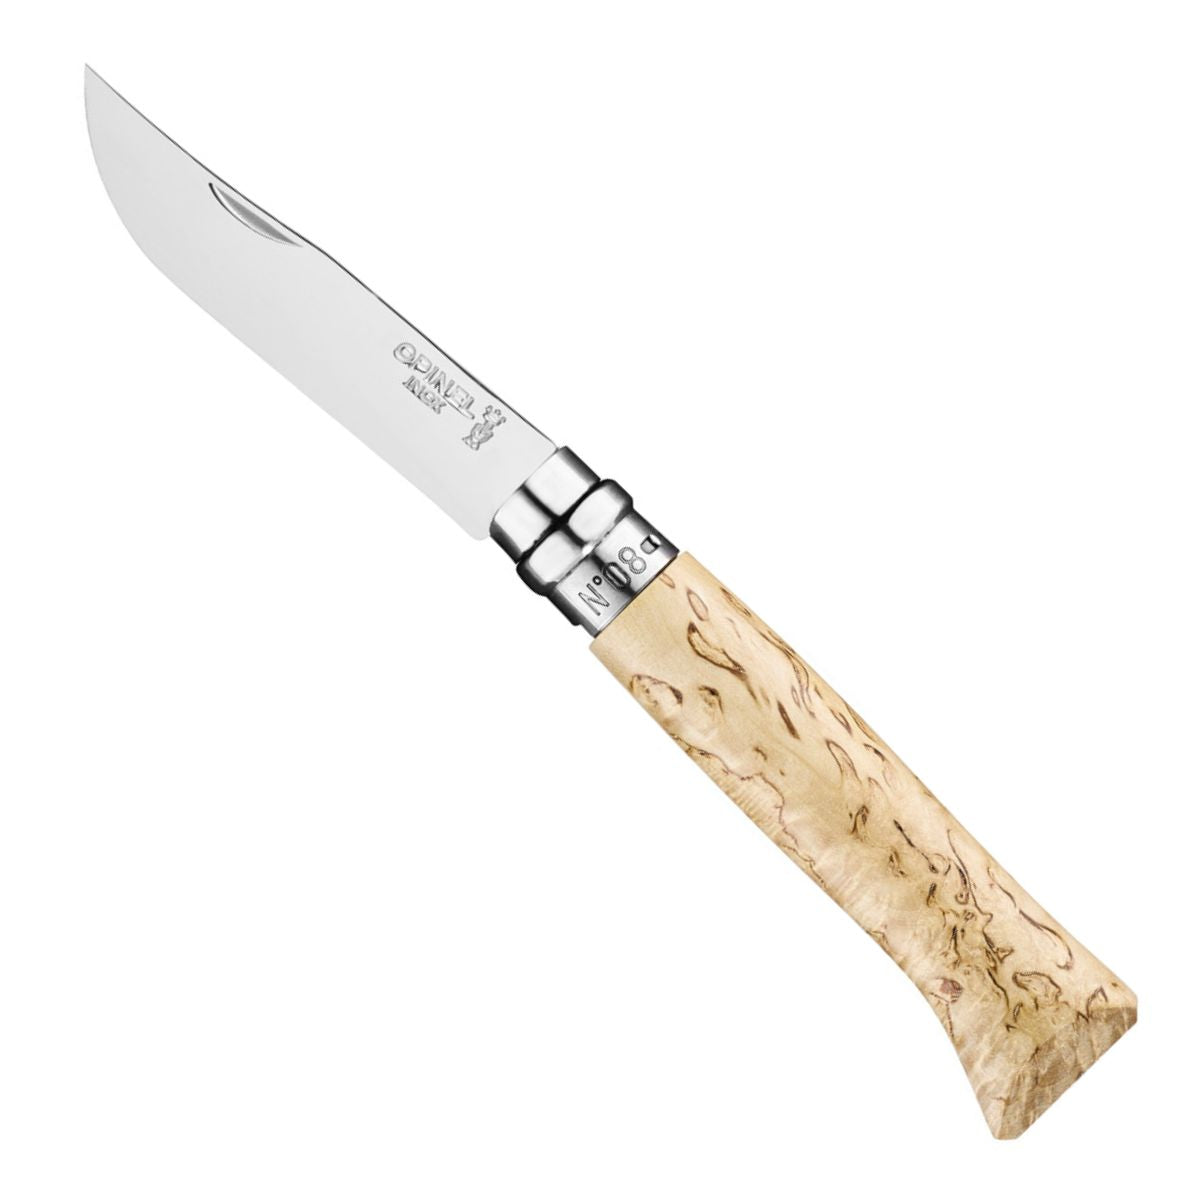 Opinel No13 Stainless Steel Folding Knife - OPINEL USA